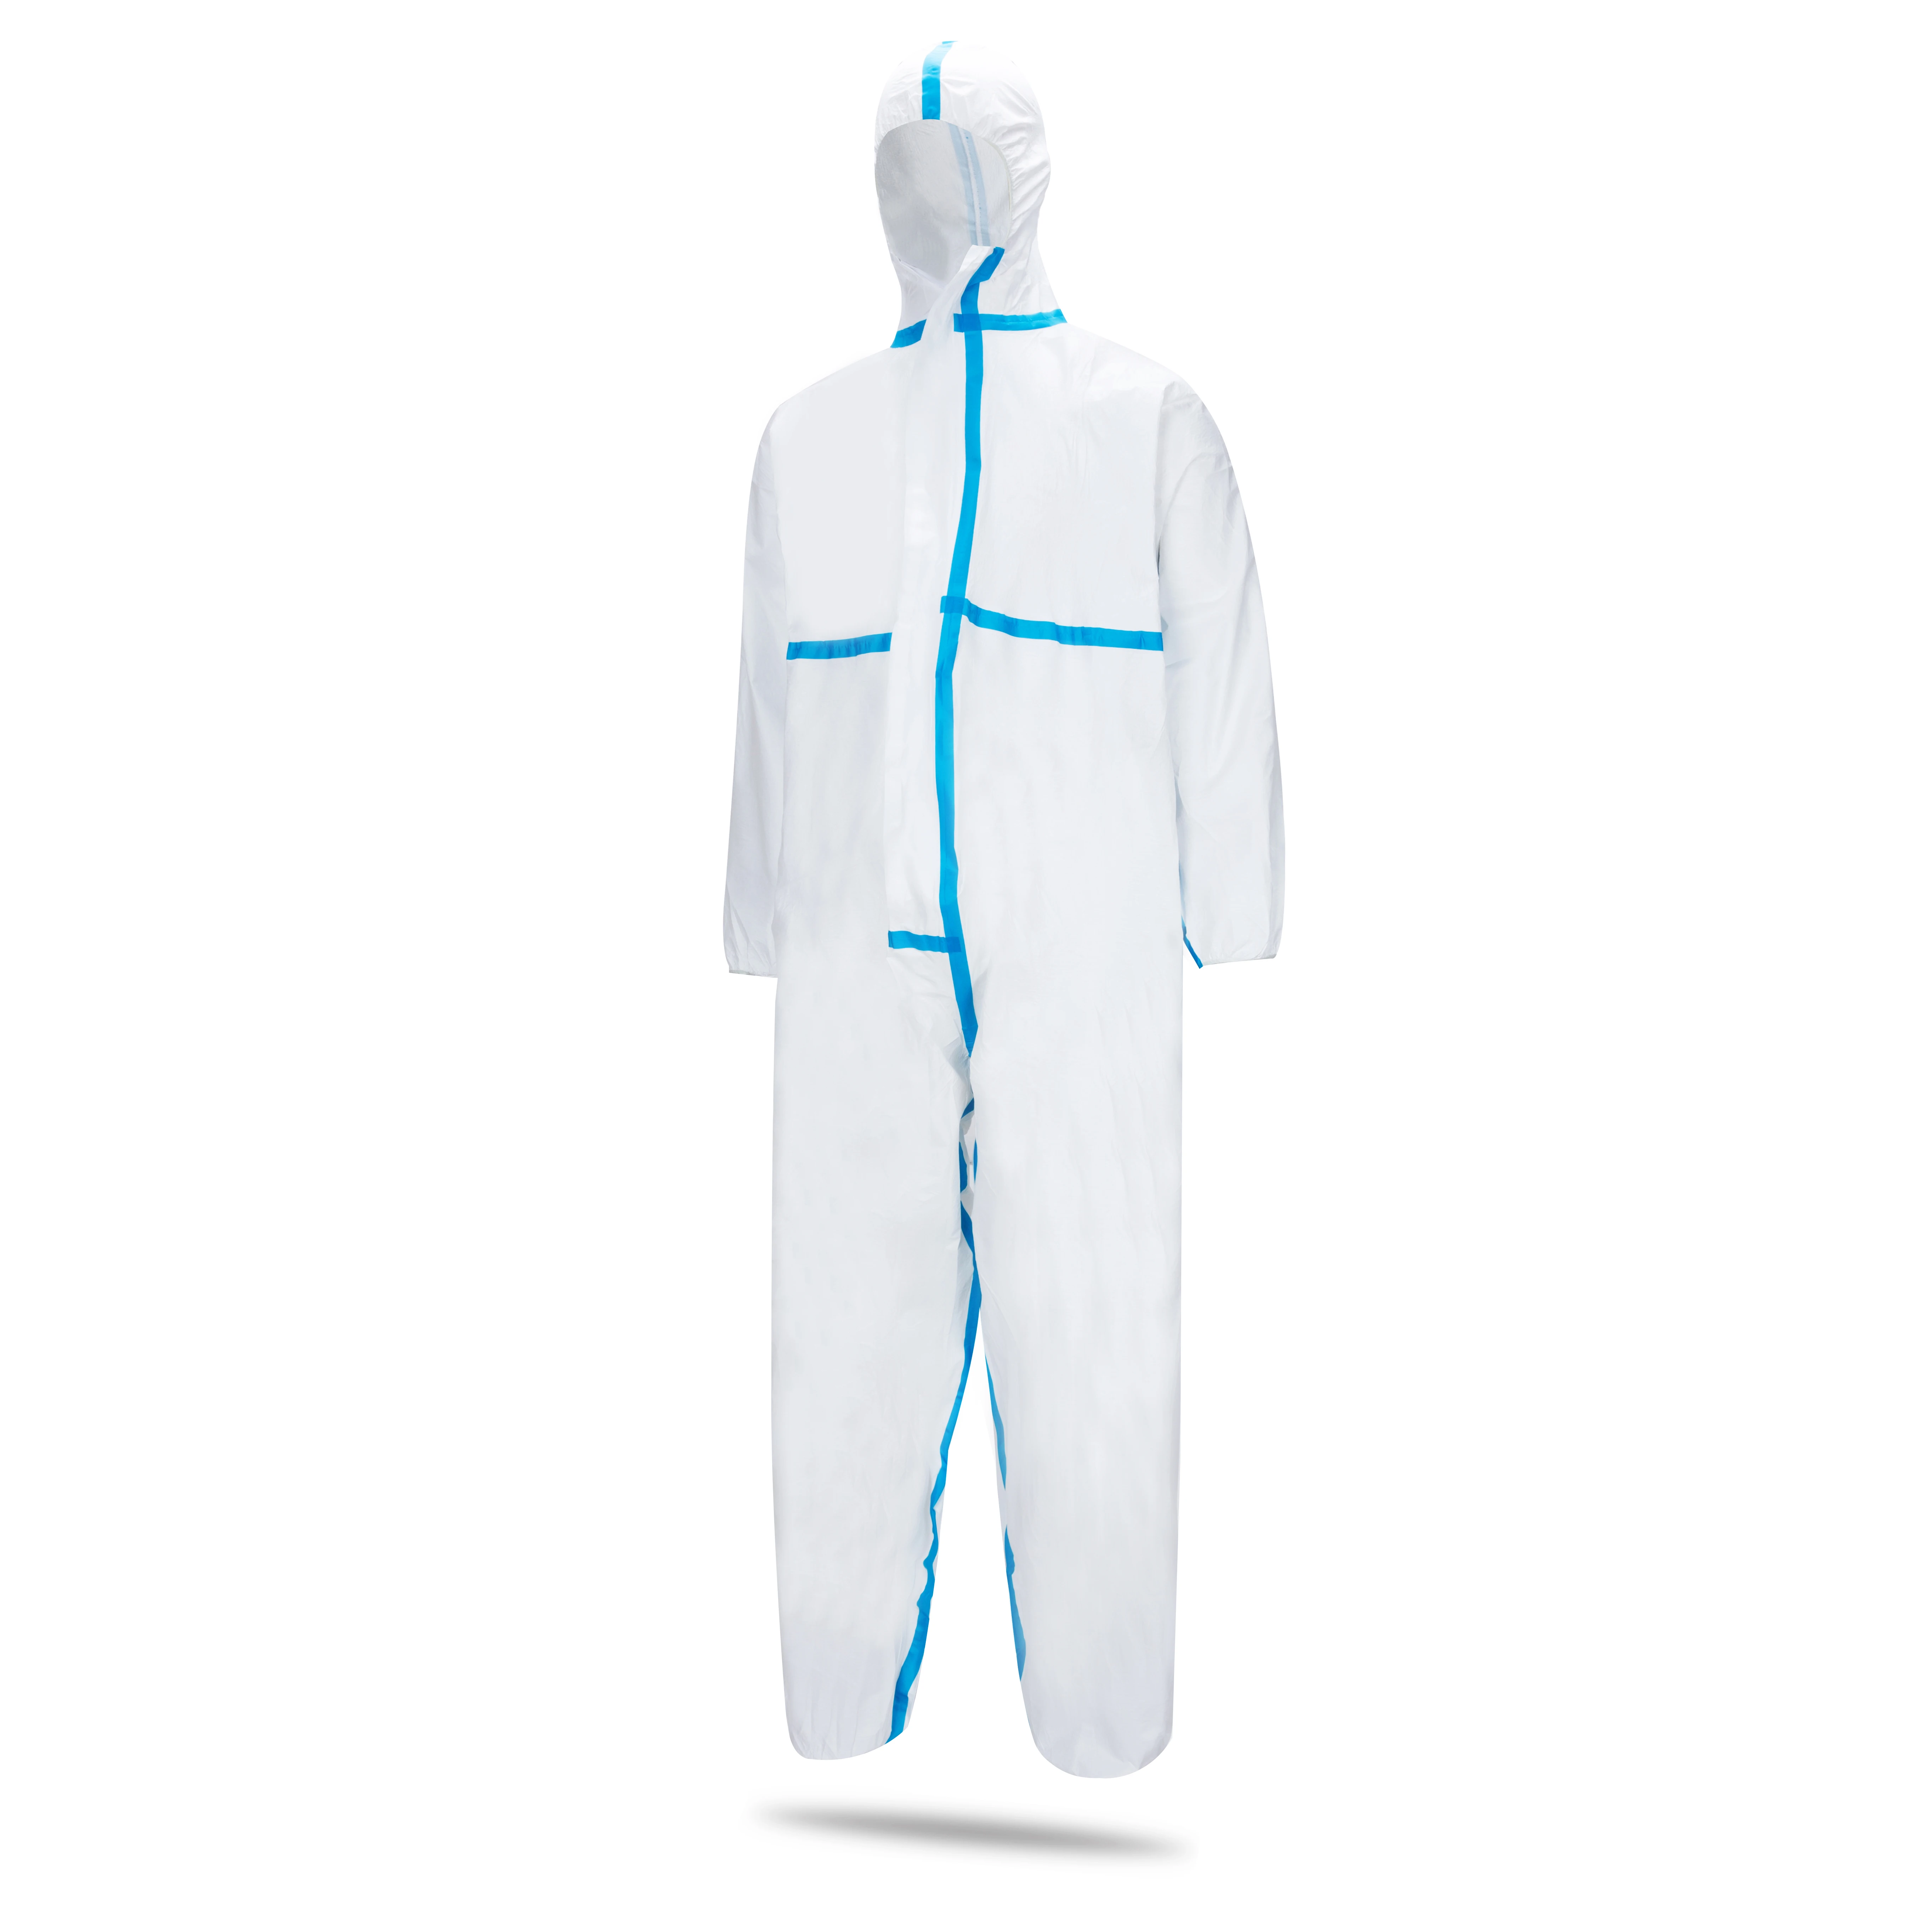 Non-woven fabric clothing Disposable coverall safety suit protection suit CE-CAT III microporous material